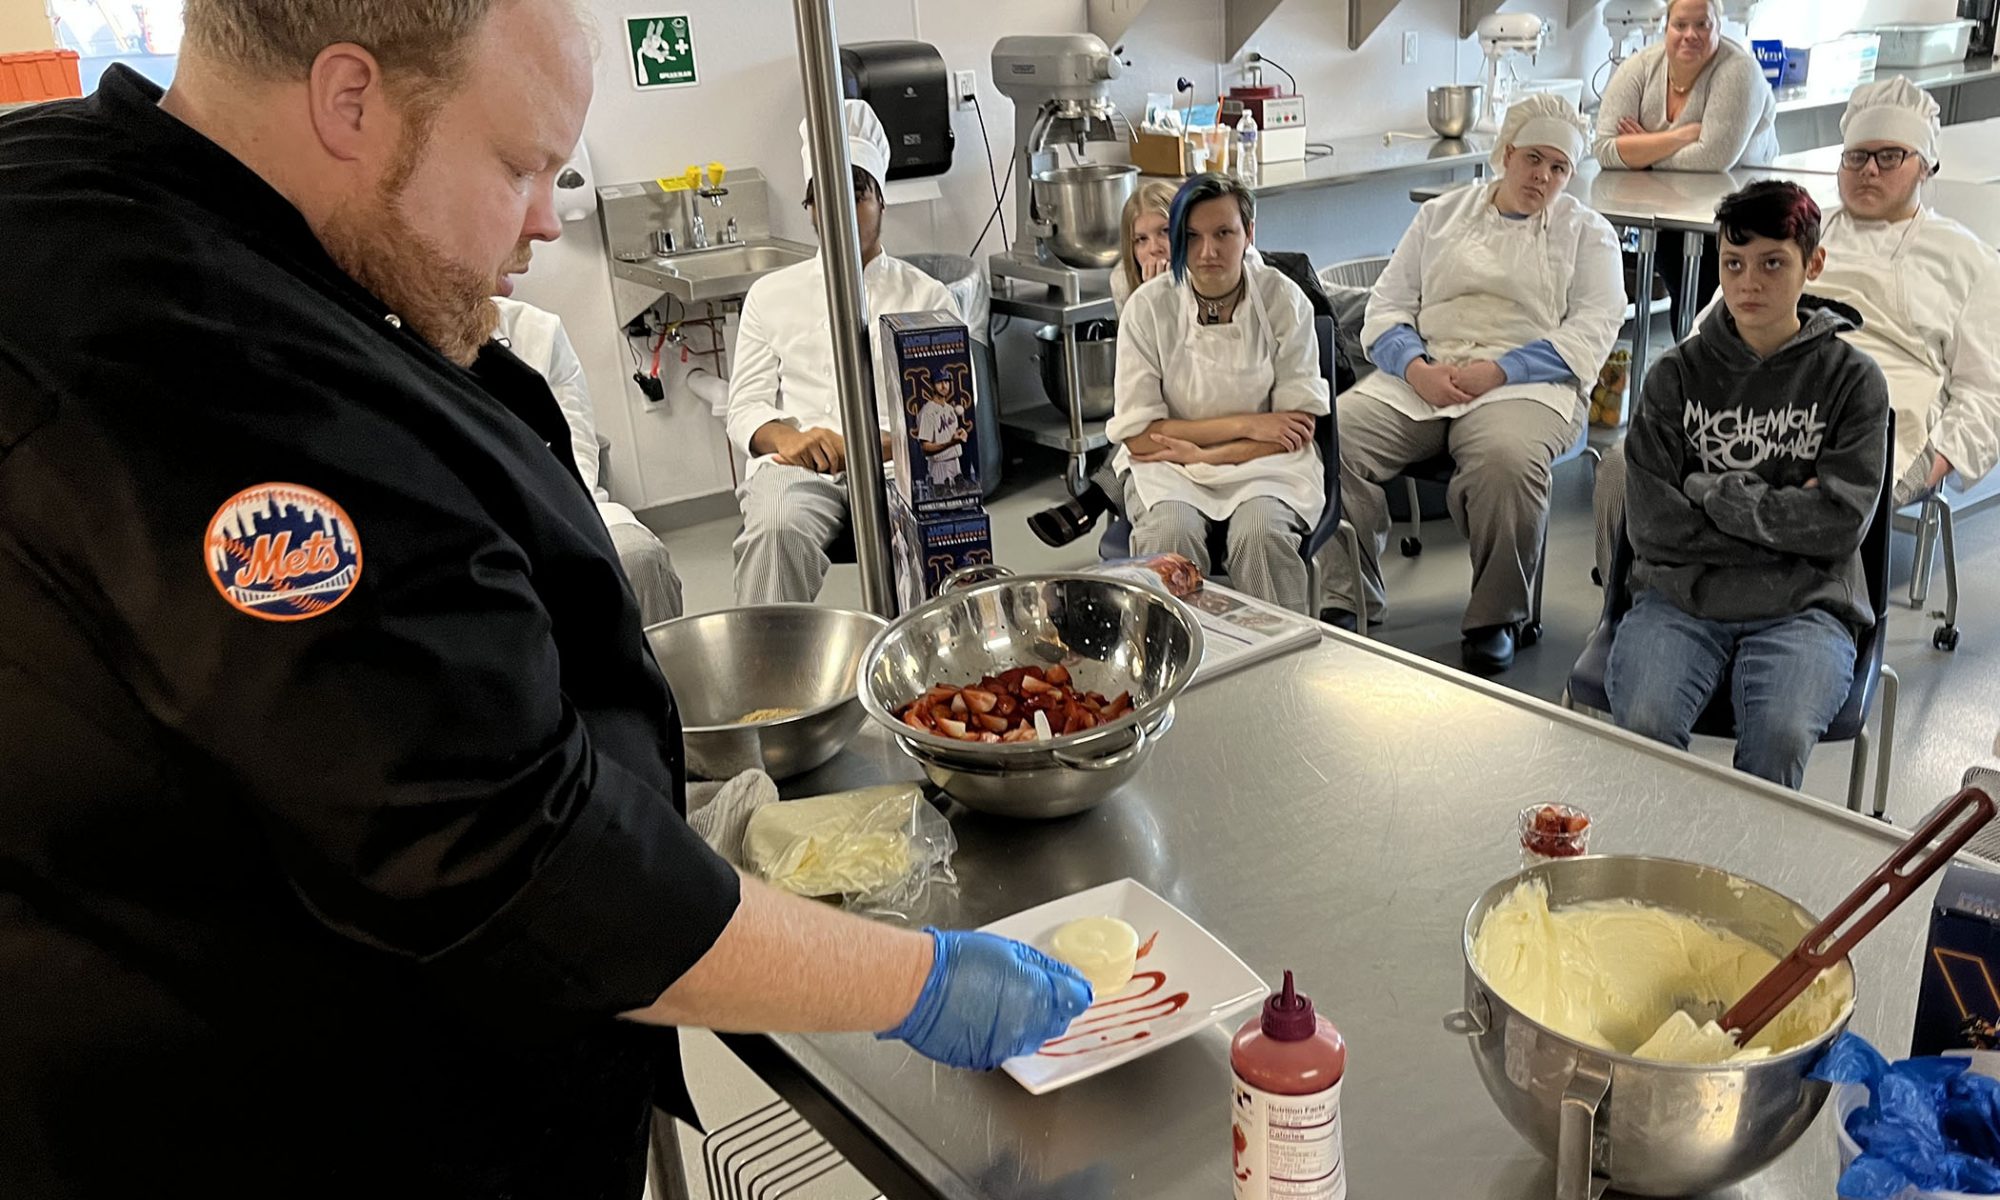 Jason Eksterowicz assembles a strawberry cheesecake, while students are seated and look on. Jason is wearing a black chefs coat with a New York Mets emblem on the sleeve.